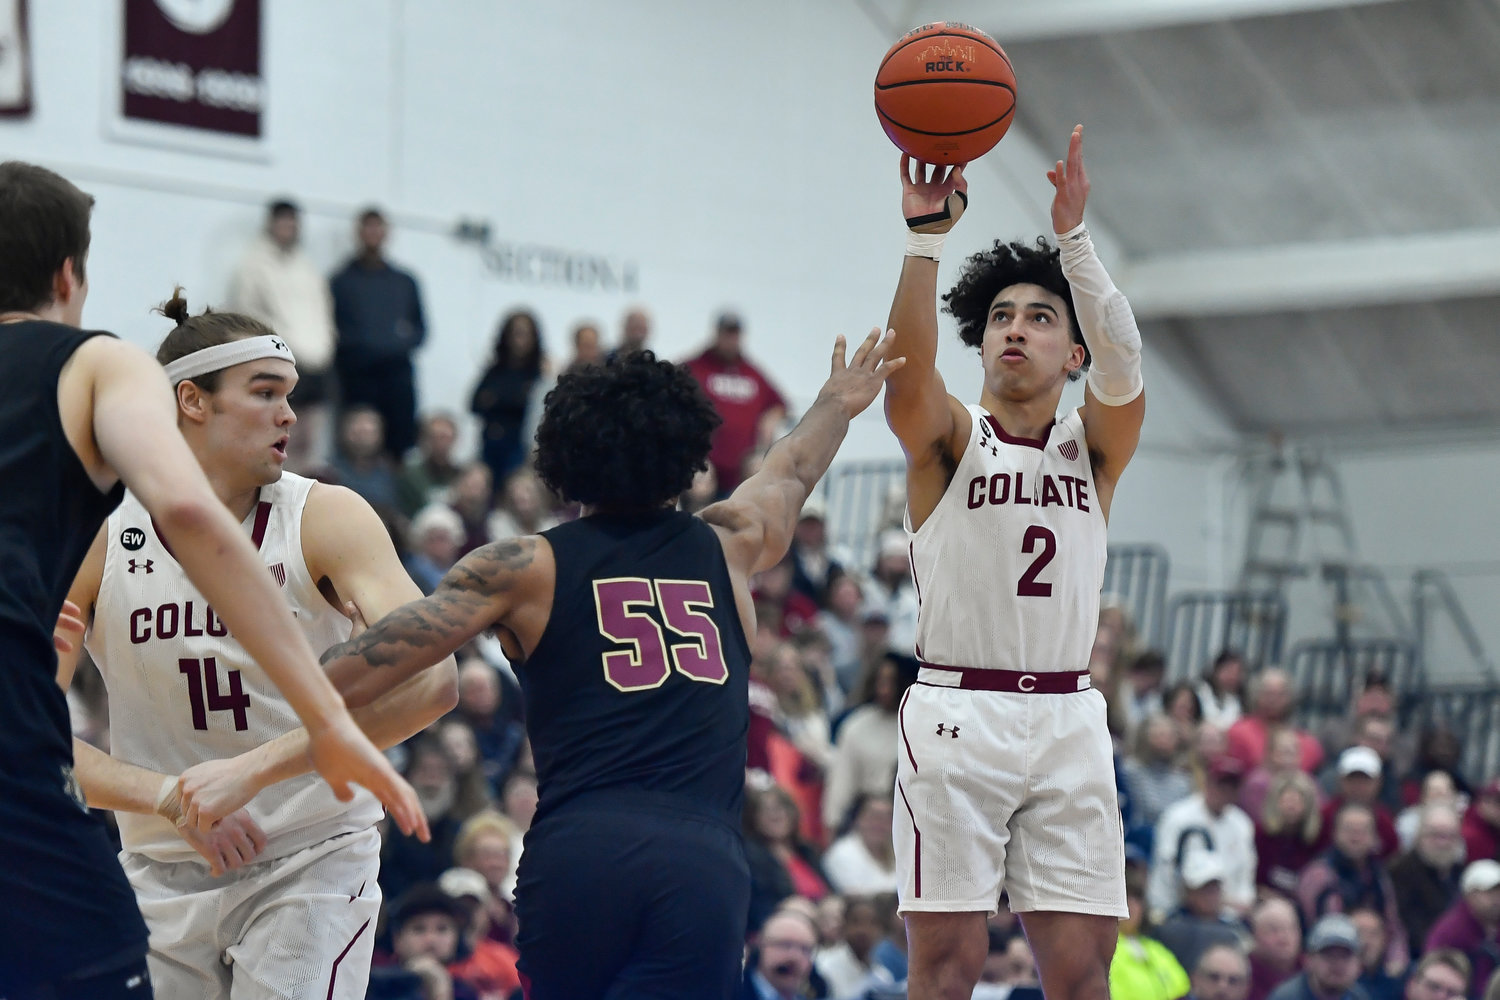 Colgate guard Braeden Smith (2) takes a shot over Lafayette forward Josh Rivera (55) during the first half of the Patriot League Tournament championship on Wednesday night in Hamilton.